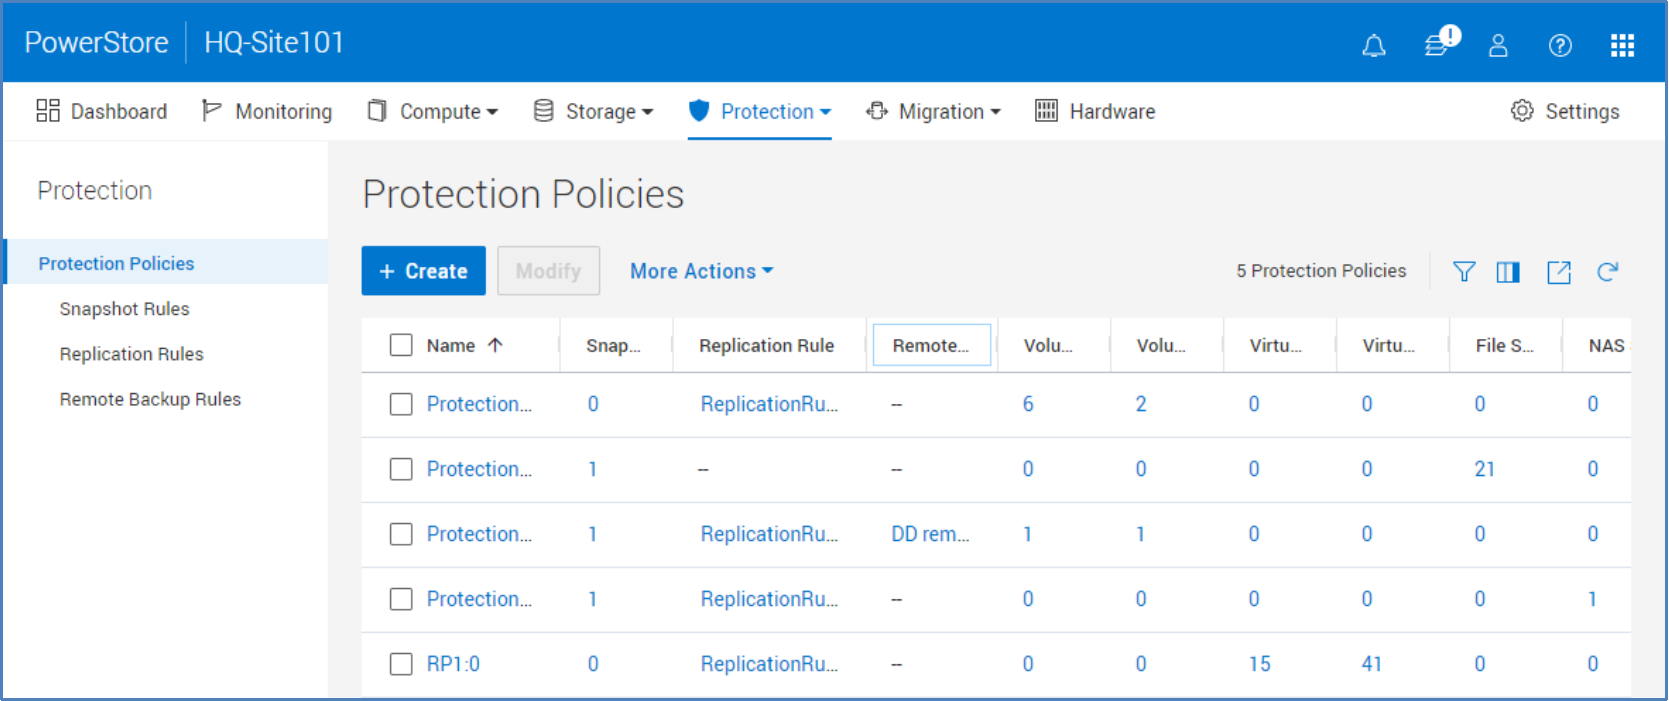 The Protection Policies pages displays the various policies that have been created on the cluster. This page also shows the various rules associated with a policy, and how many resources of each type are using the policy.